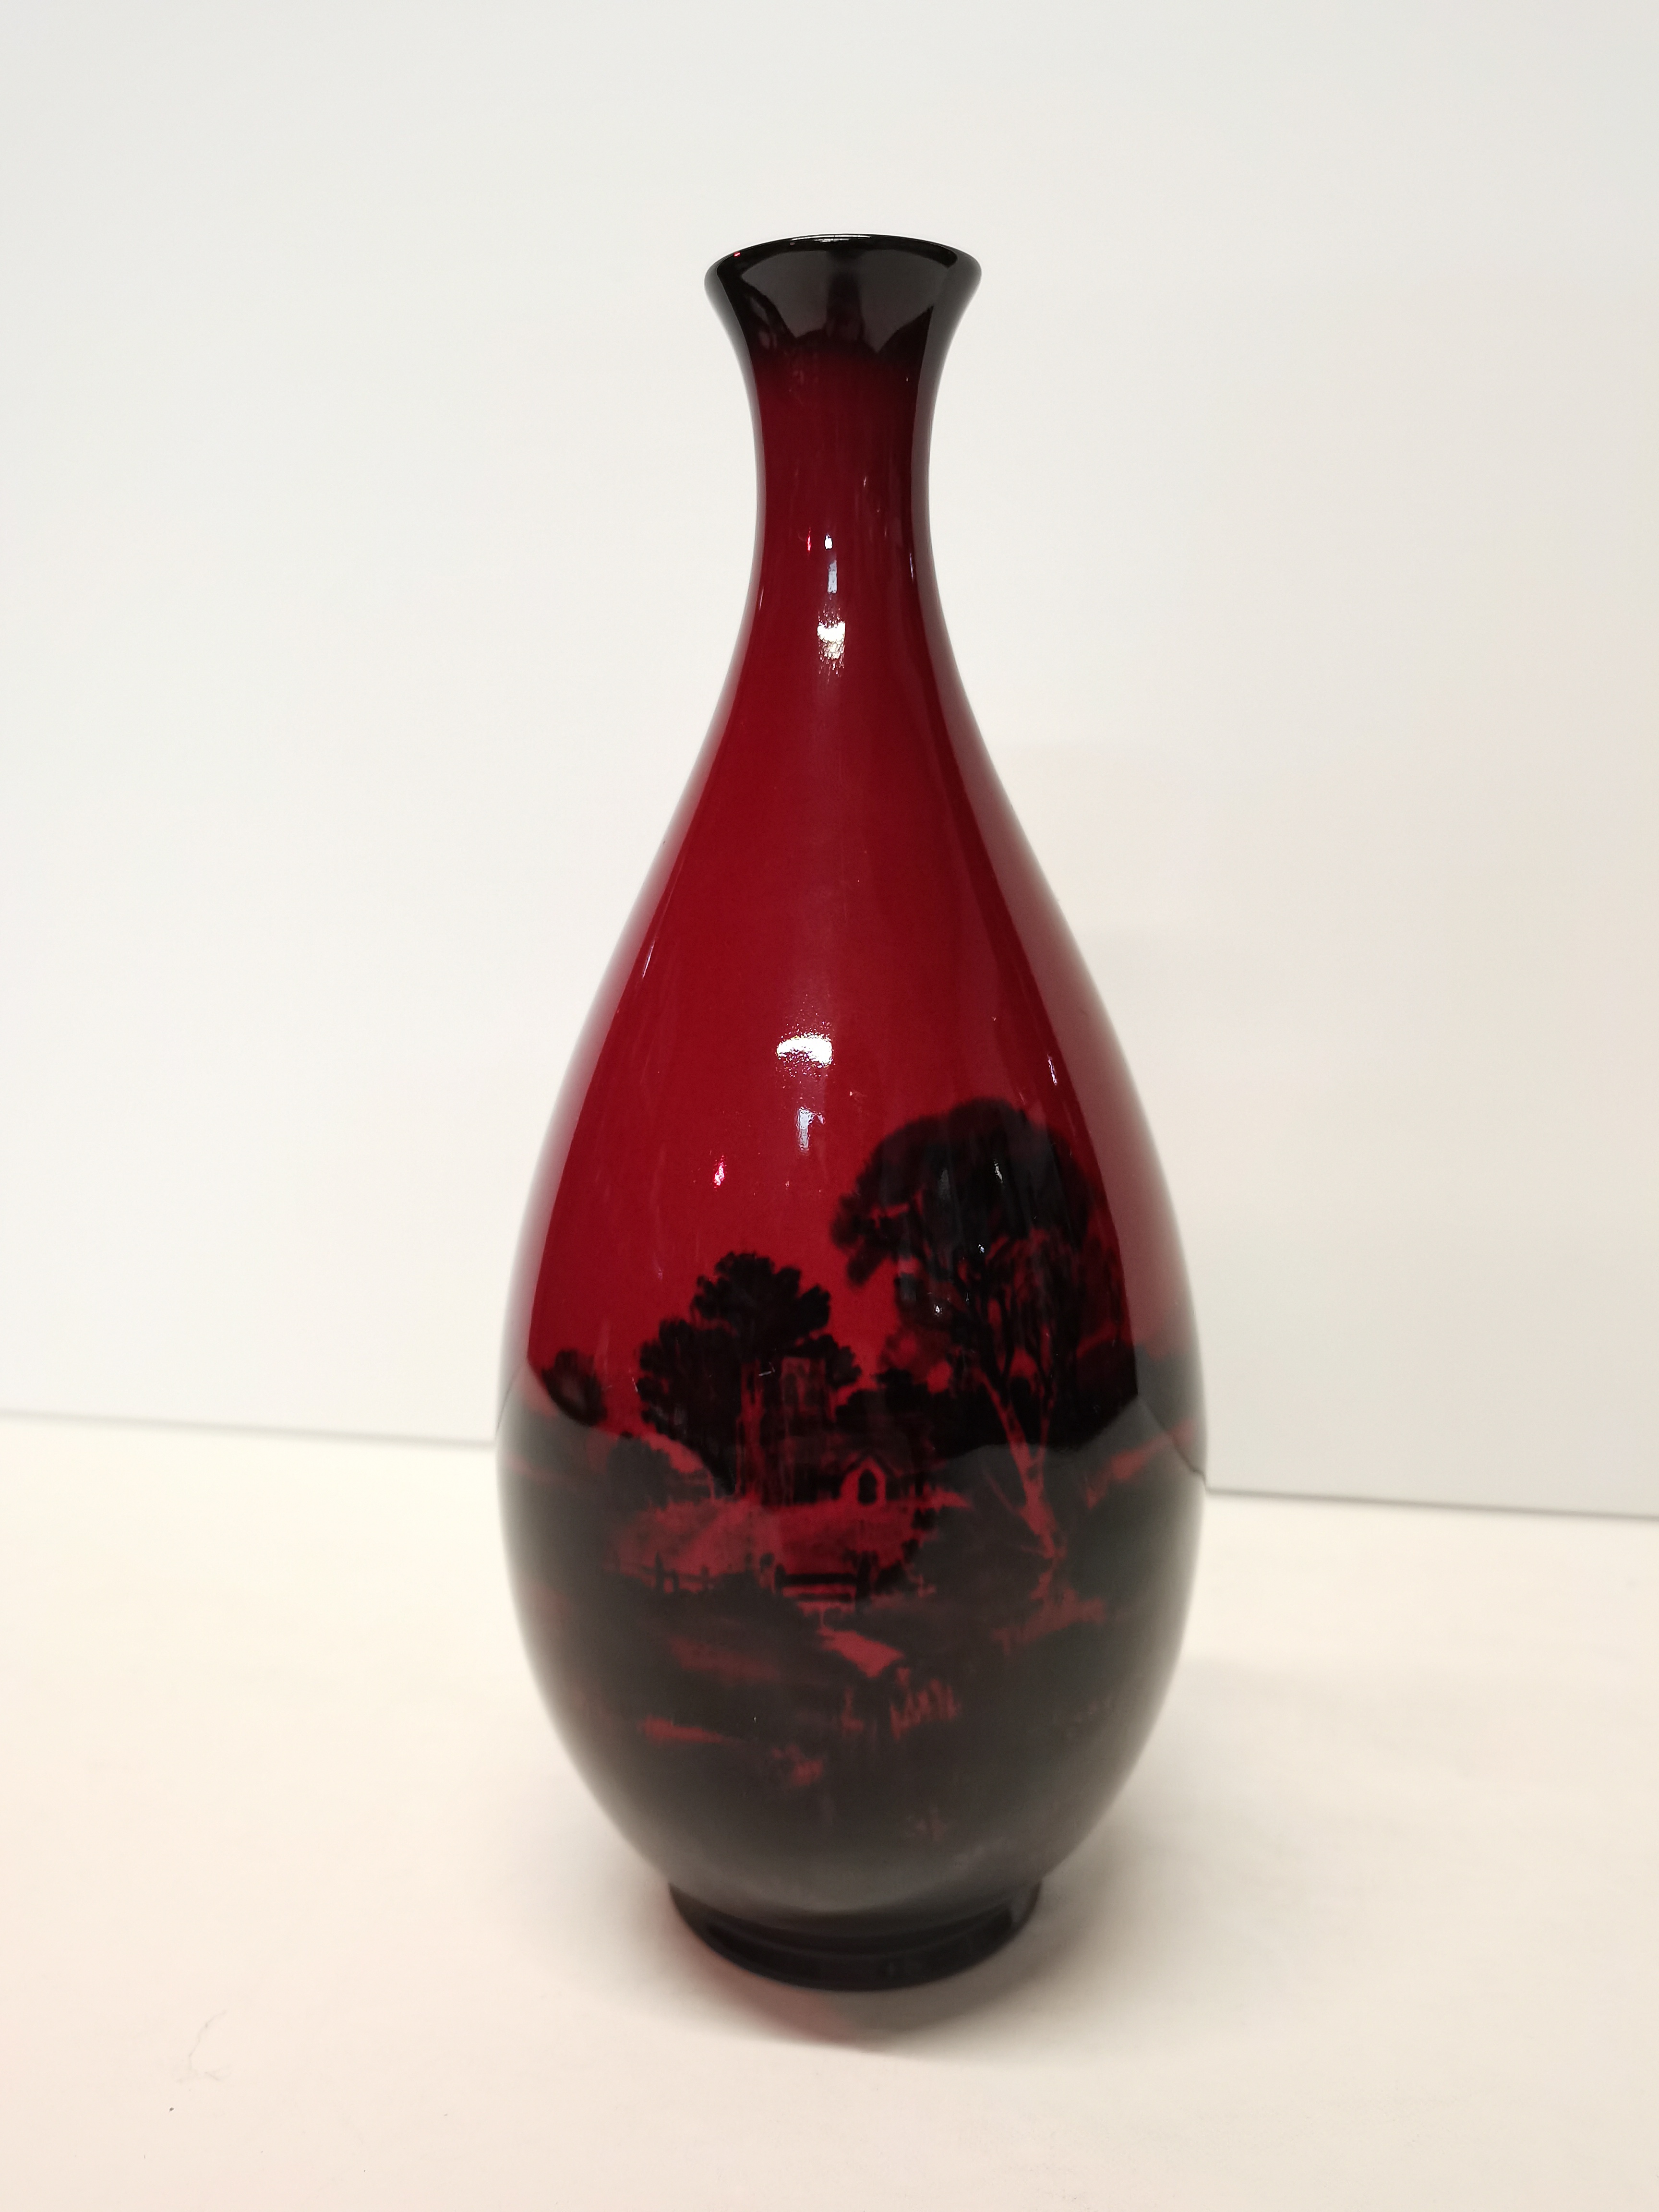 Royal Doulton flambe vase with country scene 21cm ht - Image 2 of 3